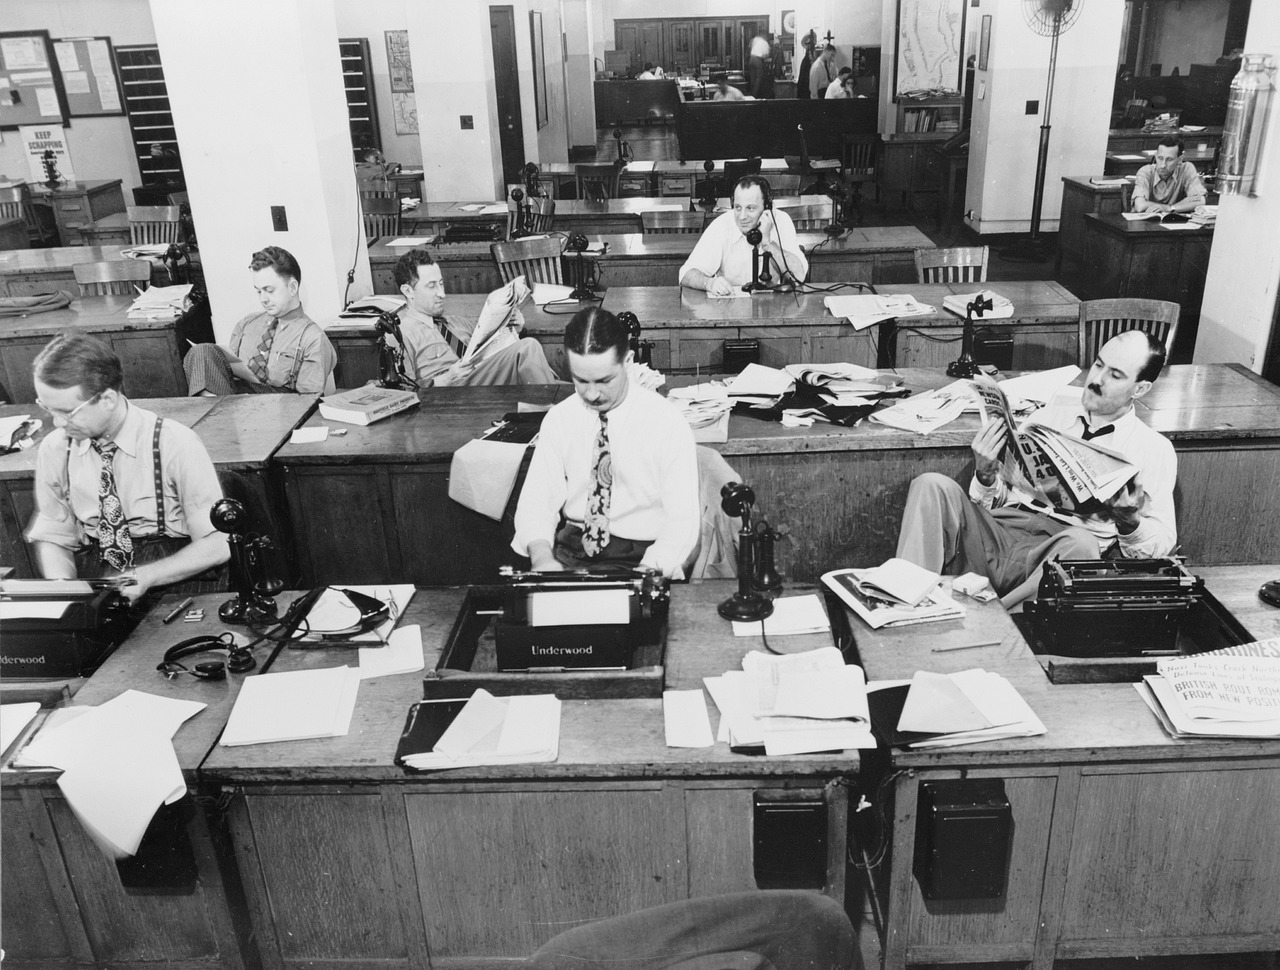 Workers using typewriters and phones with cords. Old technology.